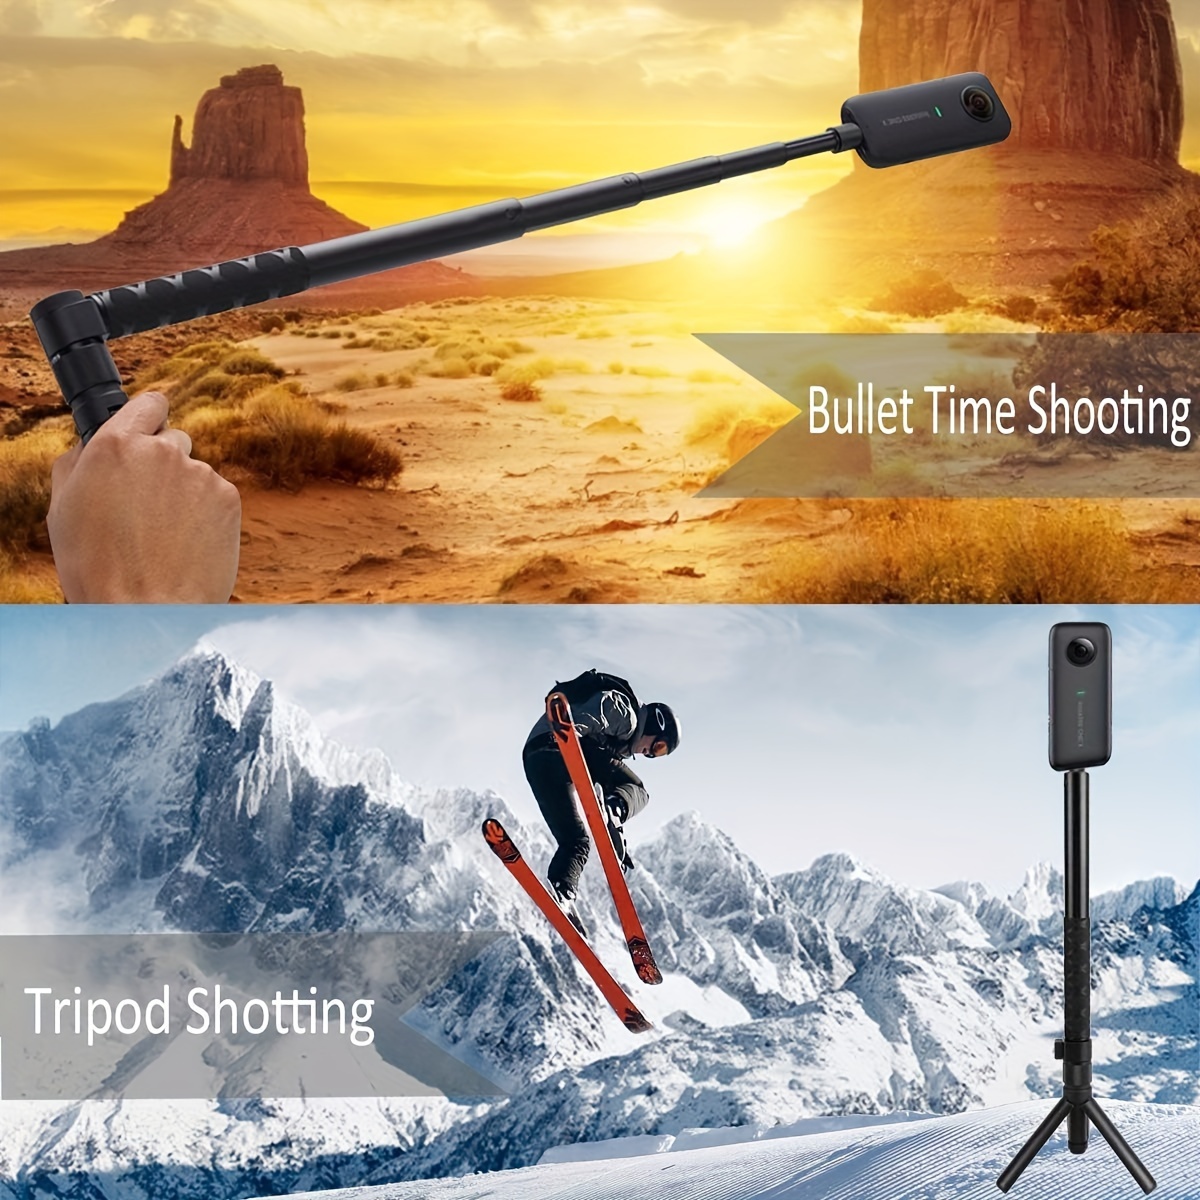  Invisible Selfie Stick for Insta360 X3/ONE RS/R/X2/X